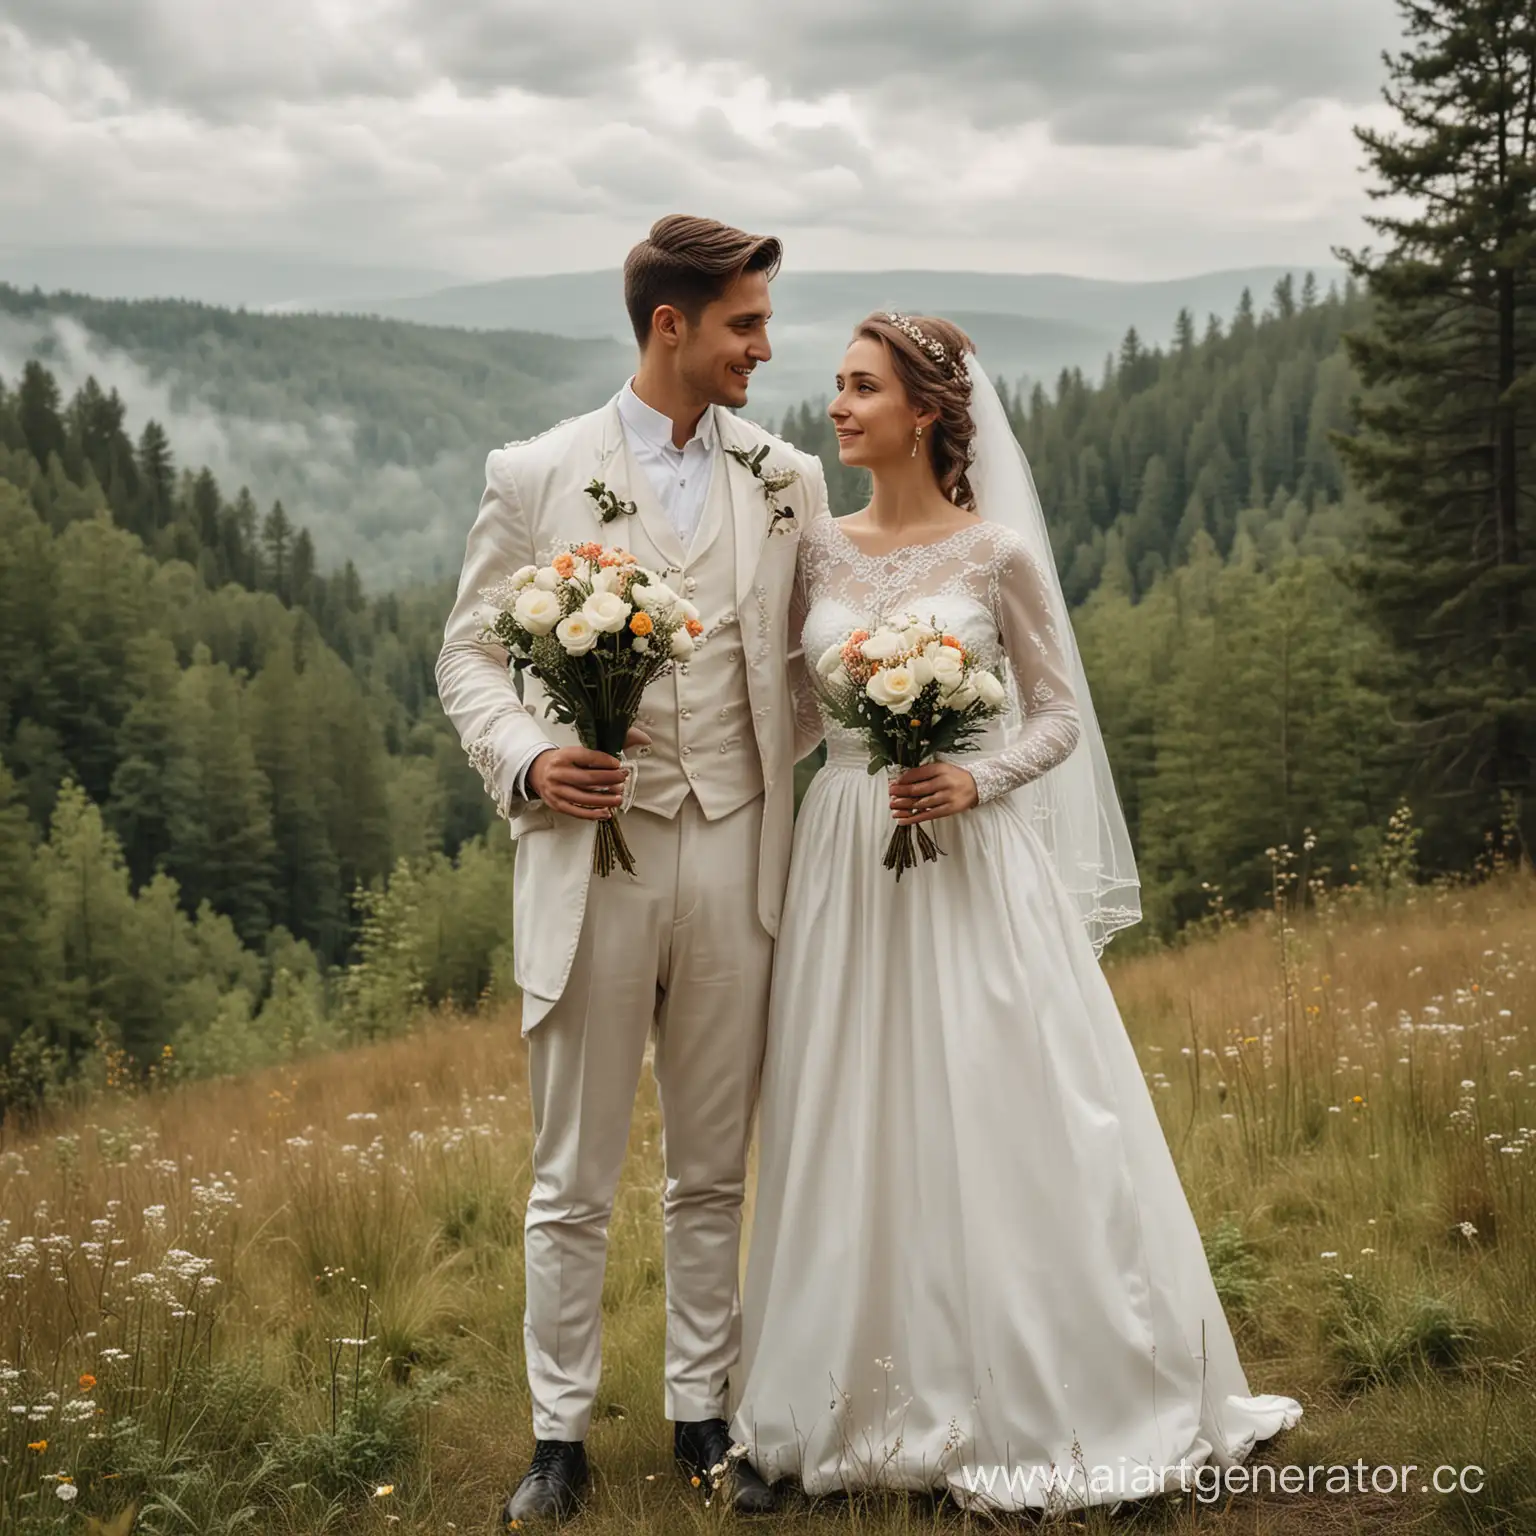 Romantic-Wedding-Couple-with-Flowers-in-Forest-Setting